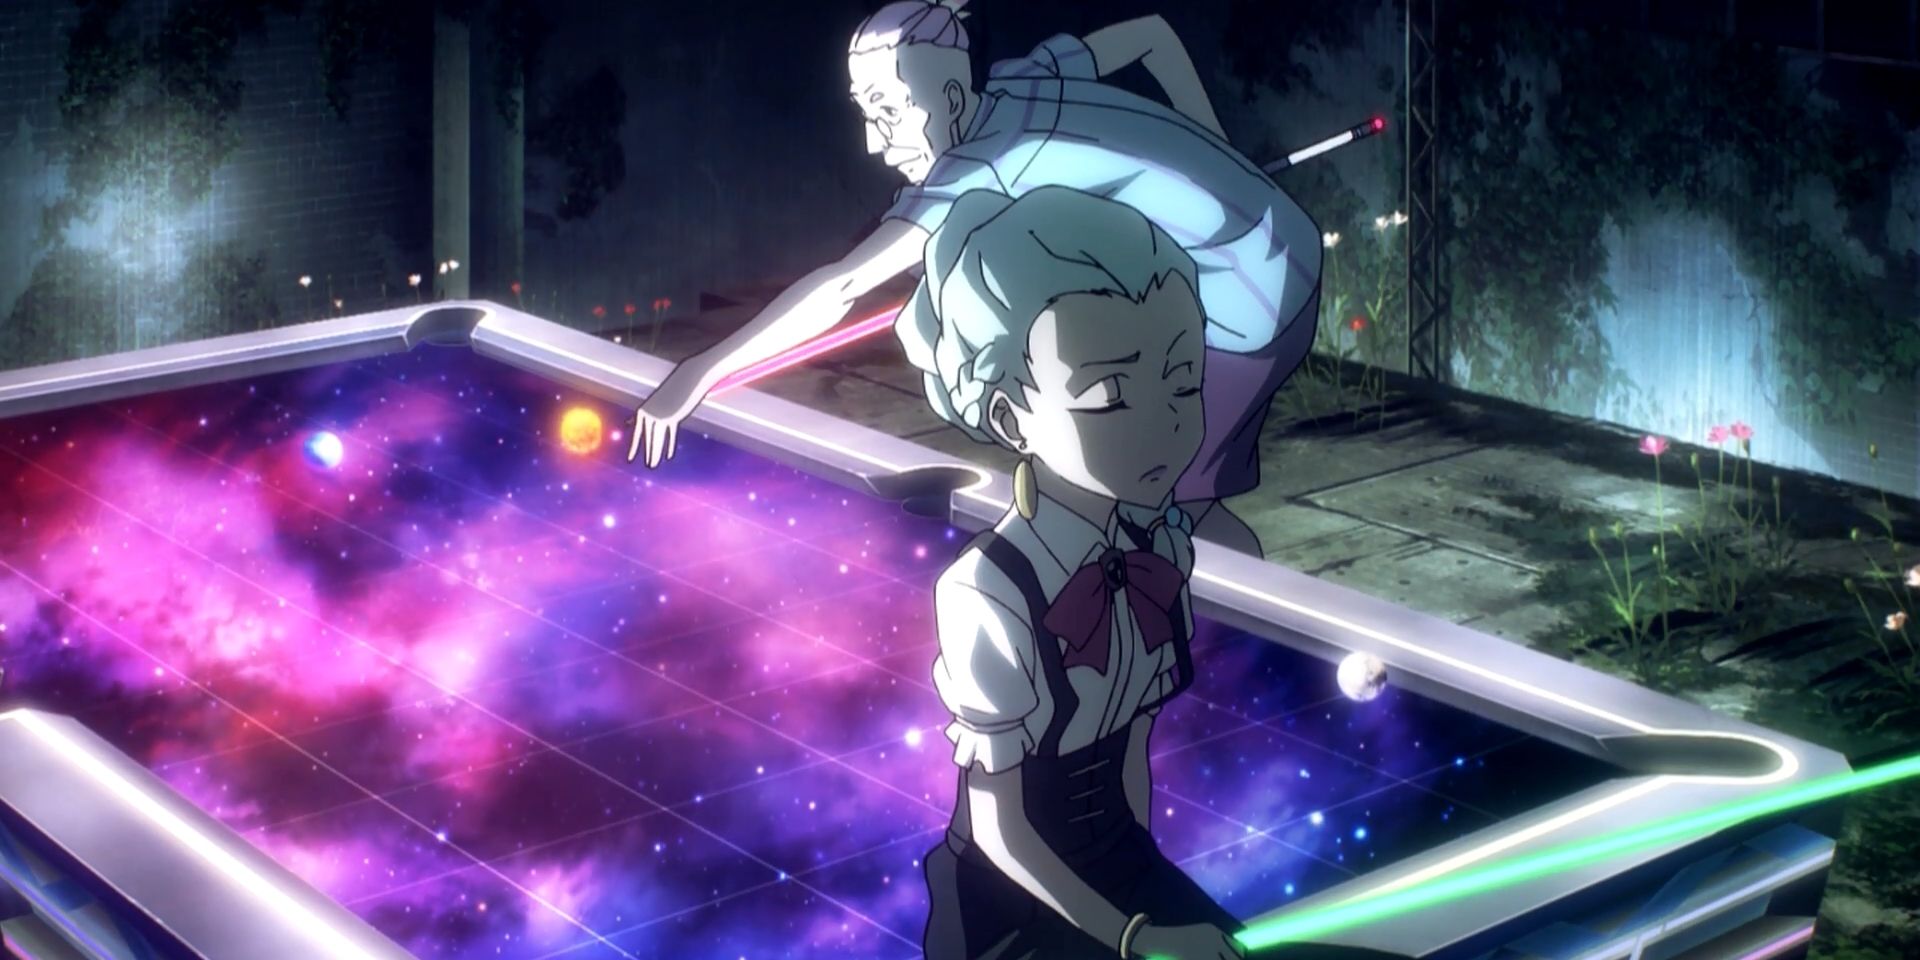 A billiards game for souls plays out in Quindecim bar in Death Parade